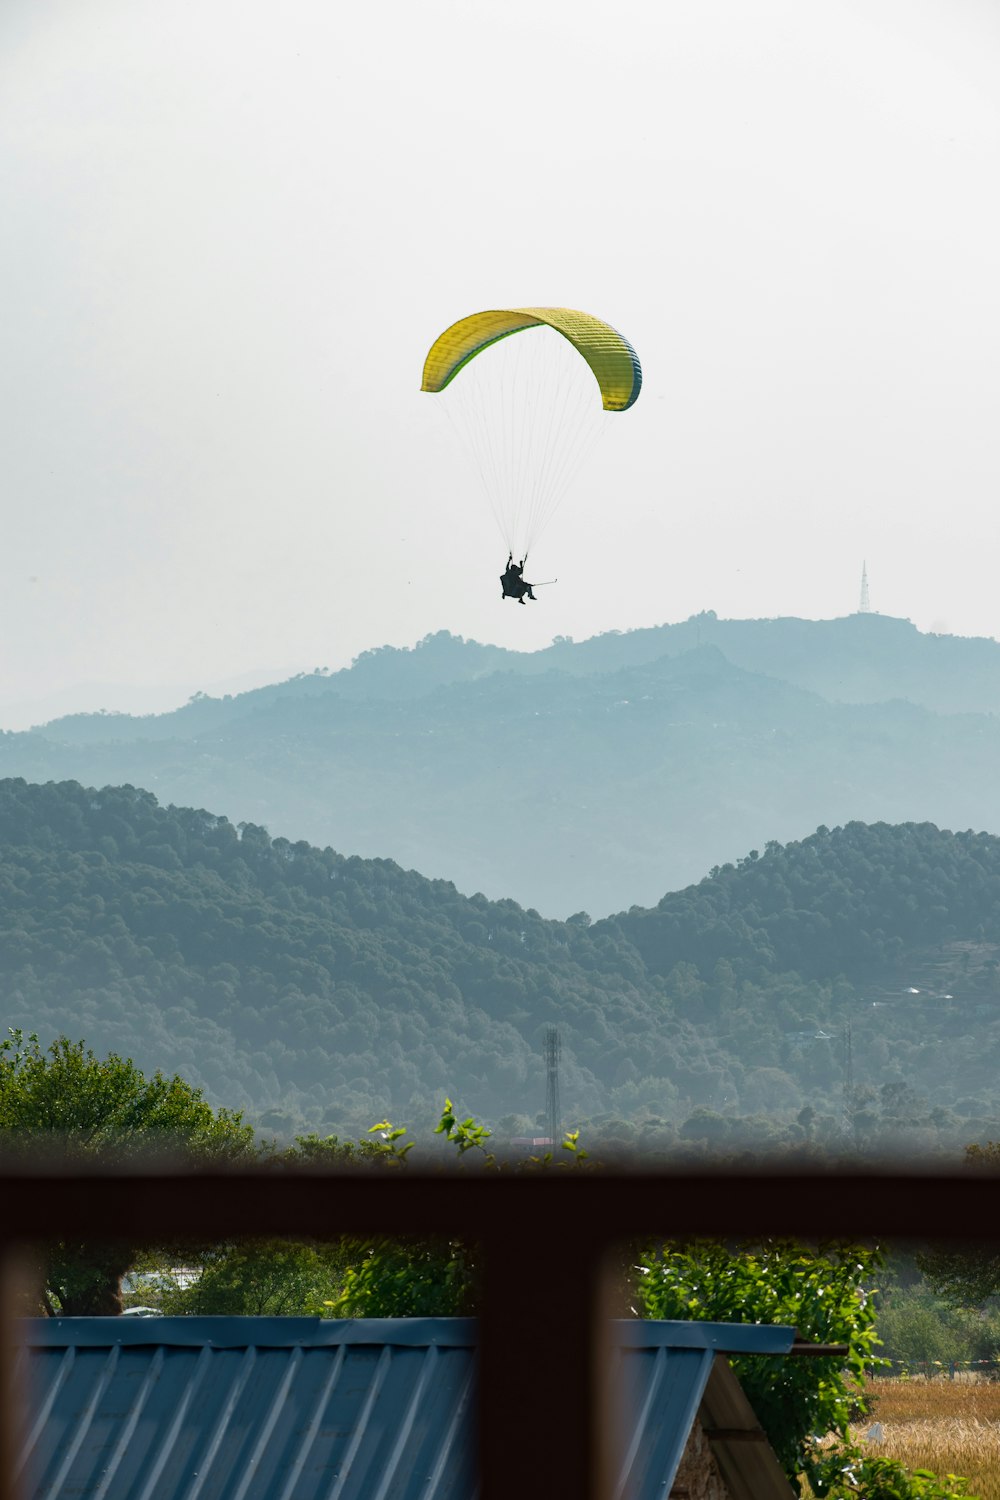 person riding yellow parachute over green mountains during daytime